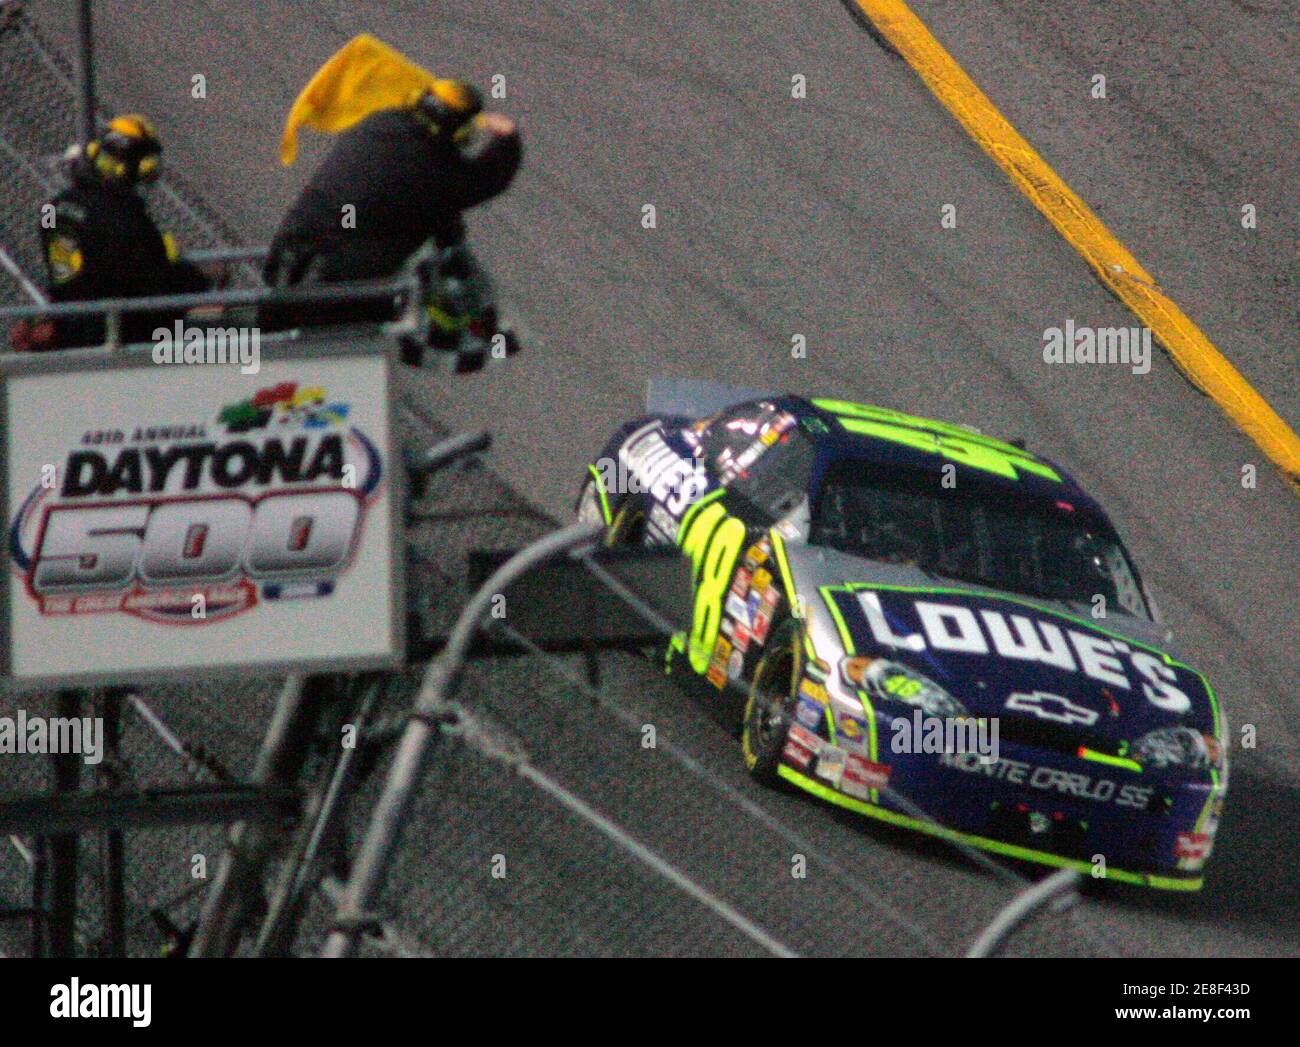 Jimmie Johnson in the number 48 Chevrolet takes the checkered flag to win the 48th Daytona 500 race at the Daytona International Speedway in Daytona Beach, Florida February 19, 2006. REUTERS/Rick Fowler Stock Photo